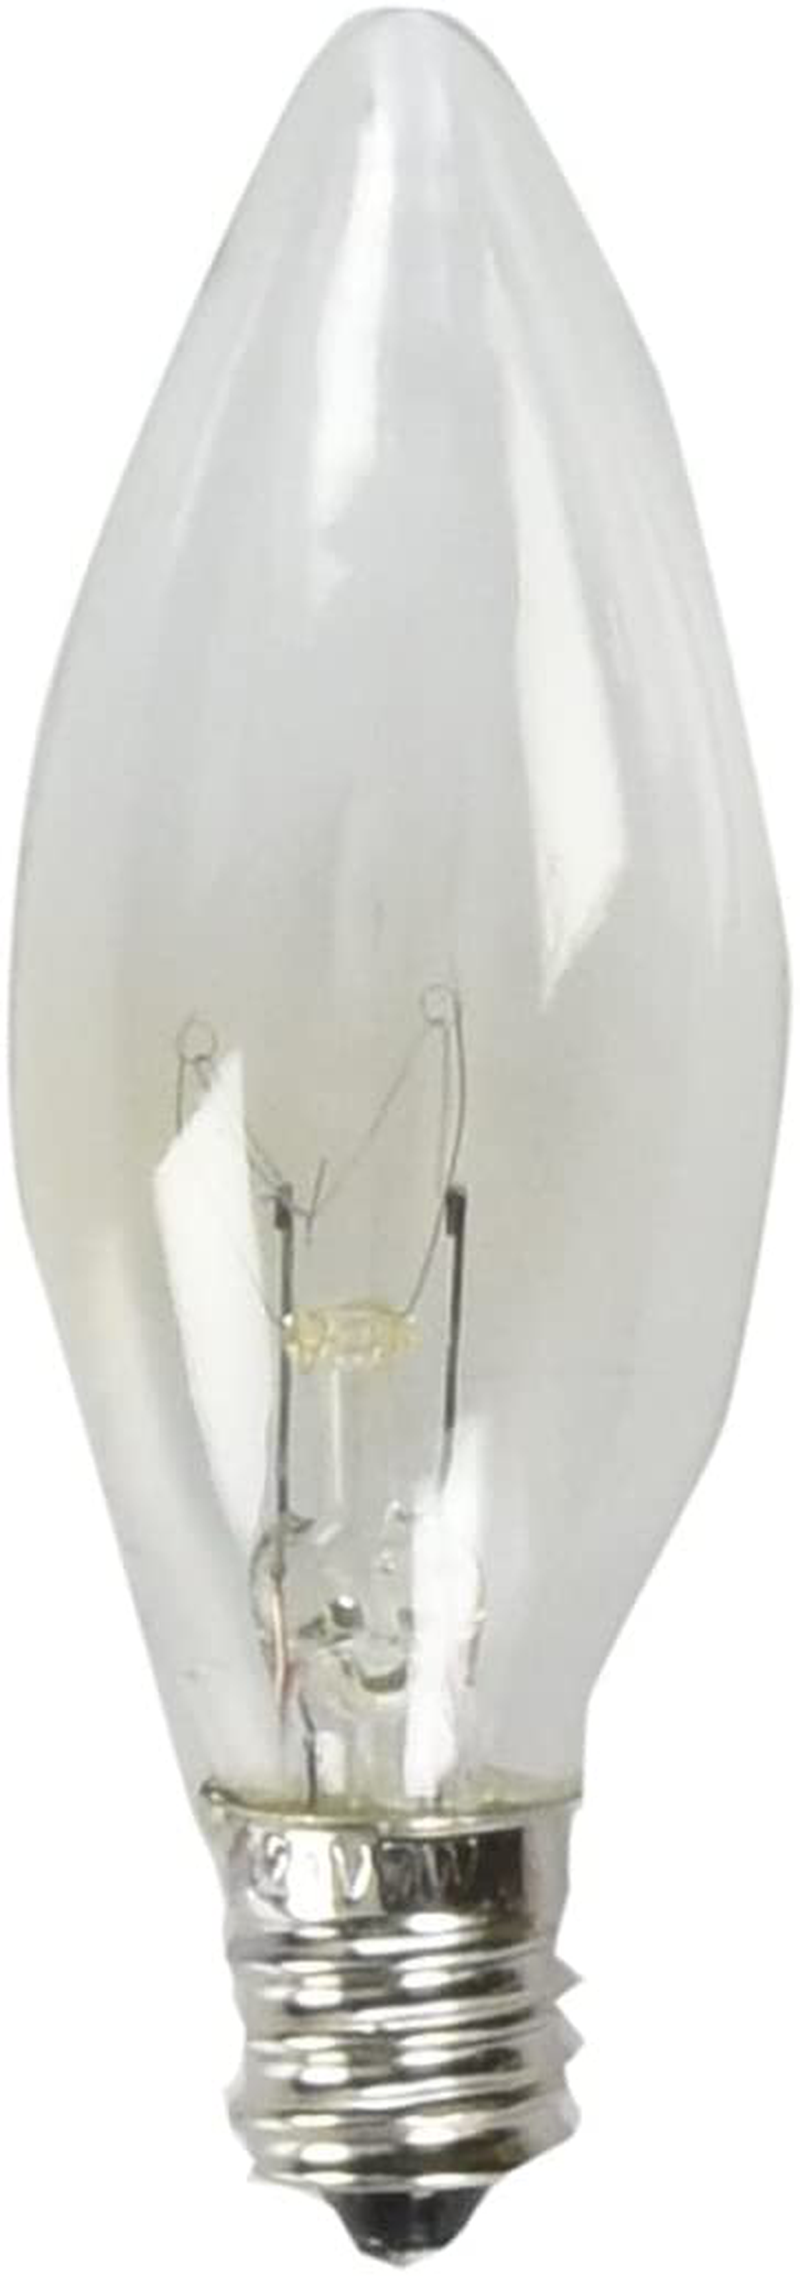 Darice Candle Lamp Collection Welcome Candle Bulbs, 3-Pack